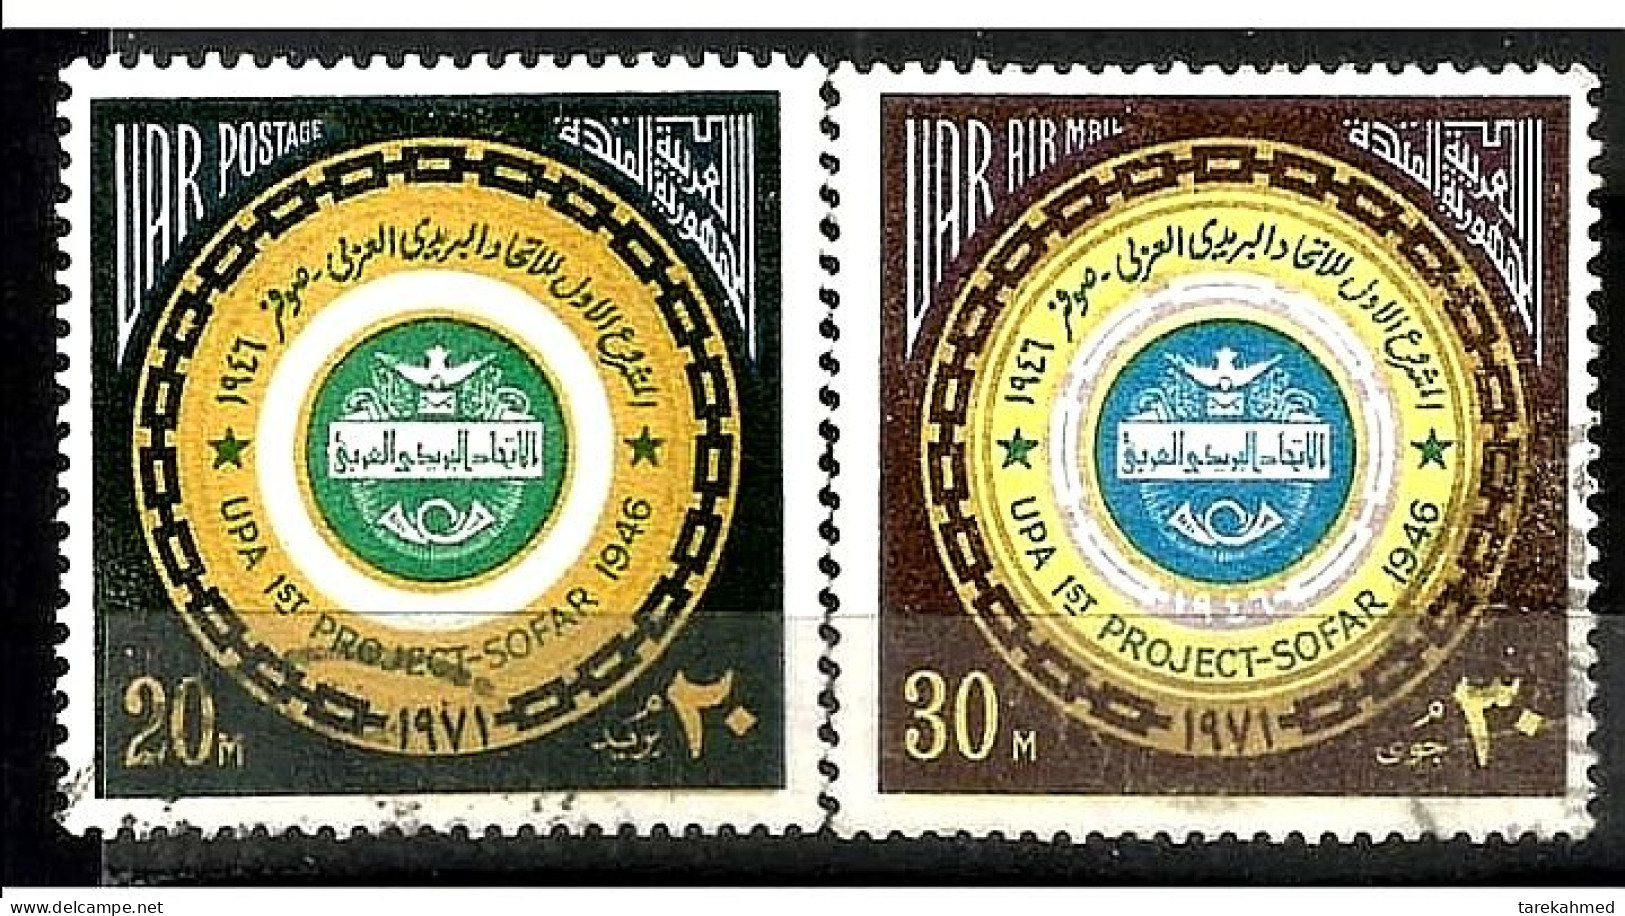 EGYPT 1971, Complete SET Of The CONFERENCE OF SOFAR, LEBANON ESTABILISHING THE APU, VF' - Used Stamps